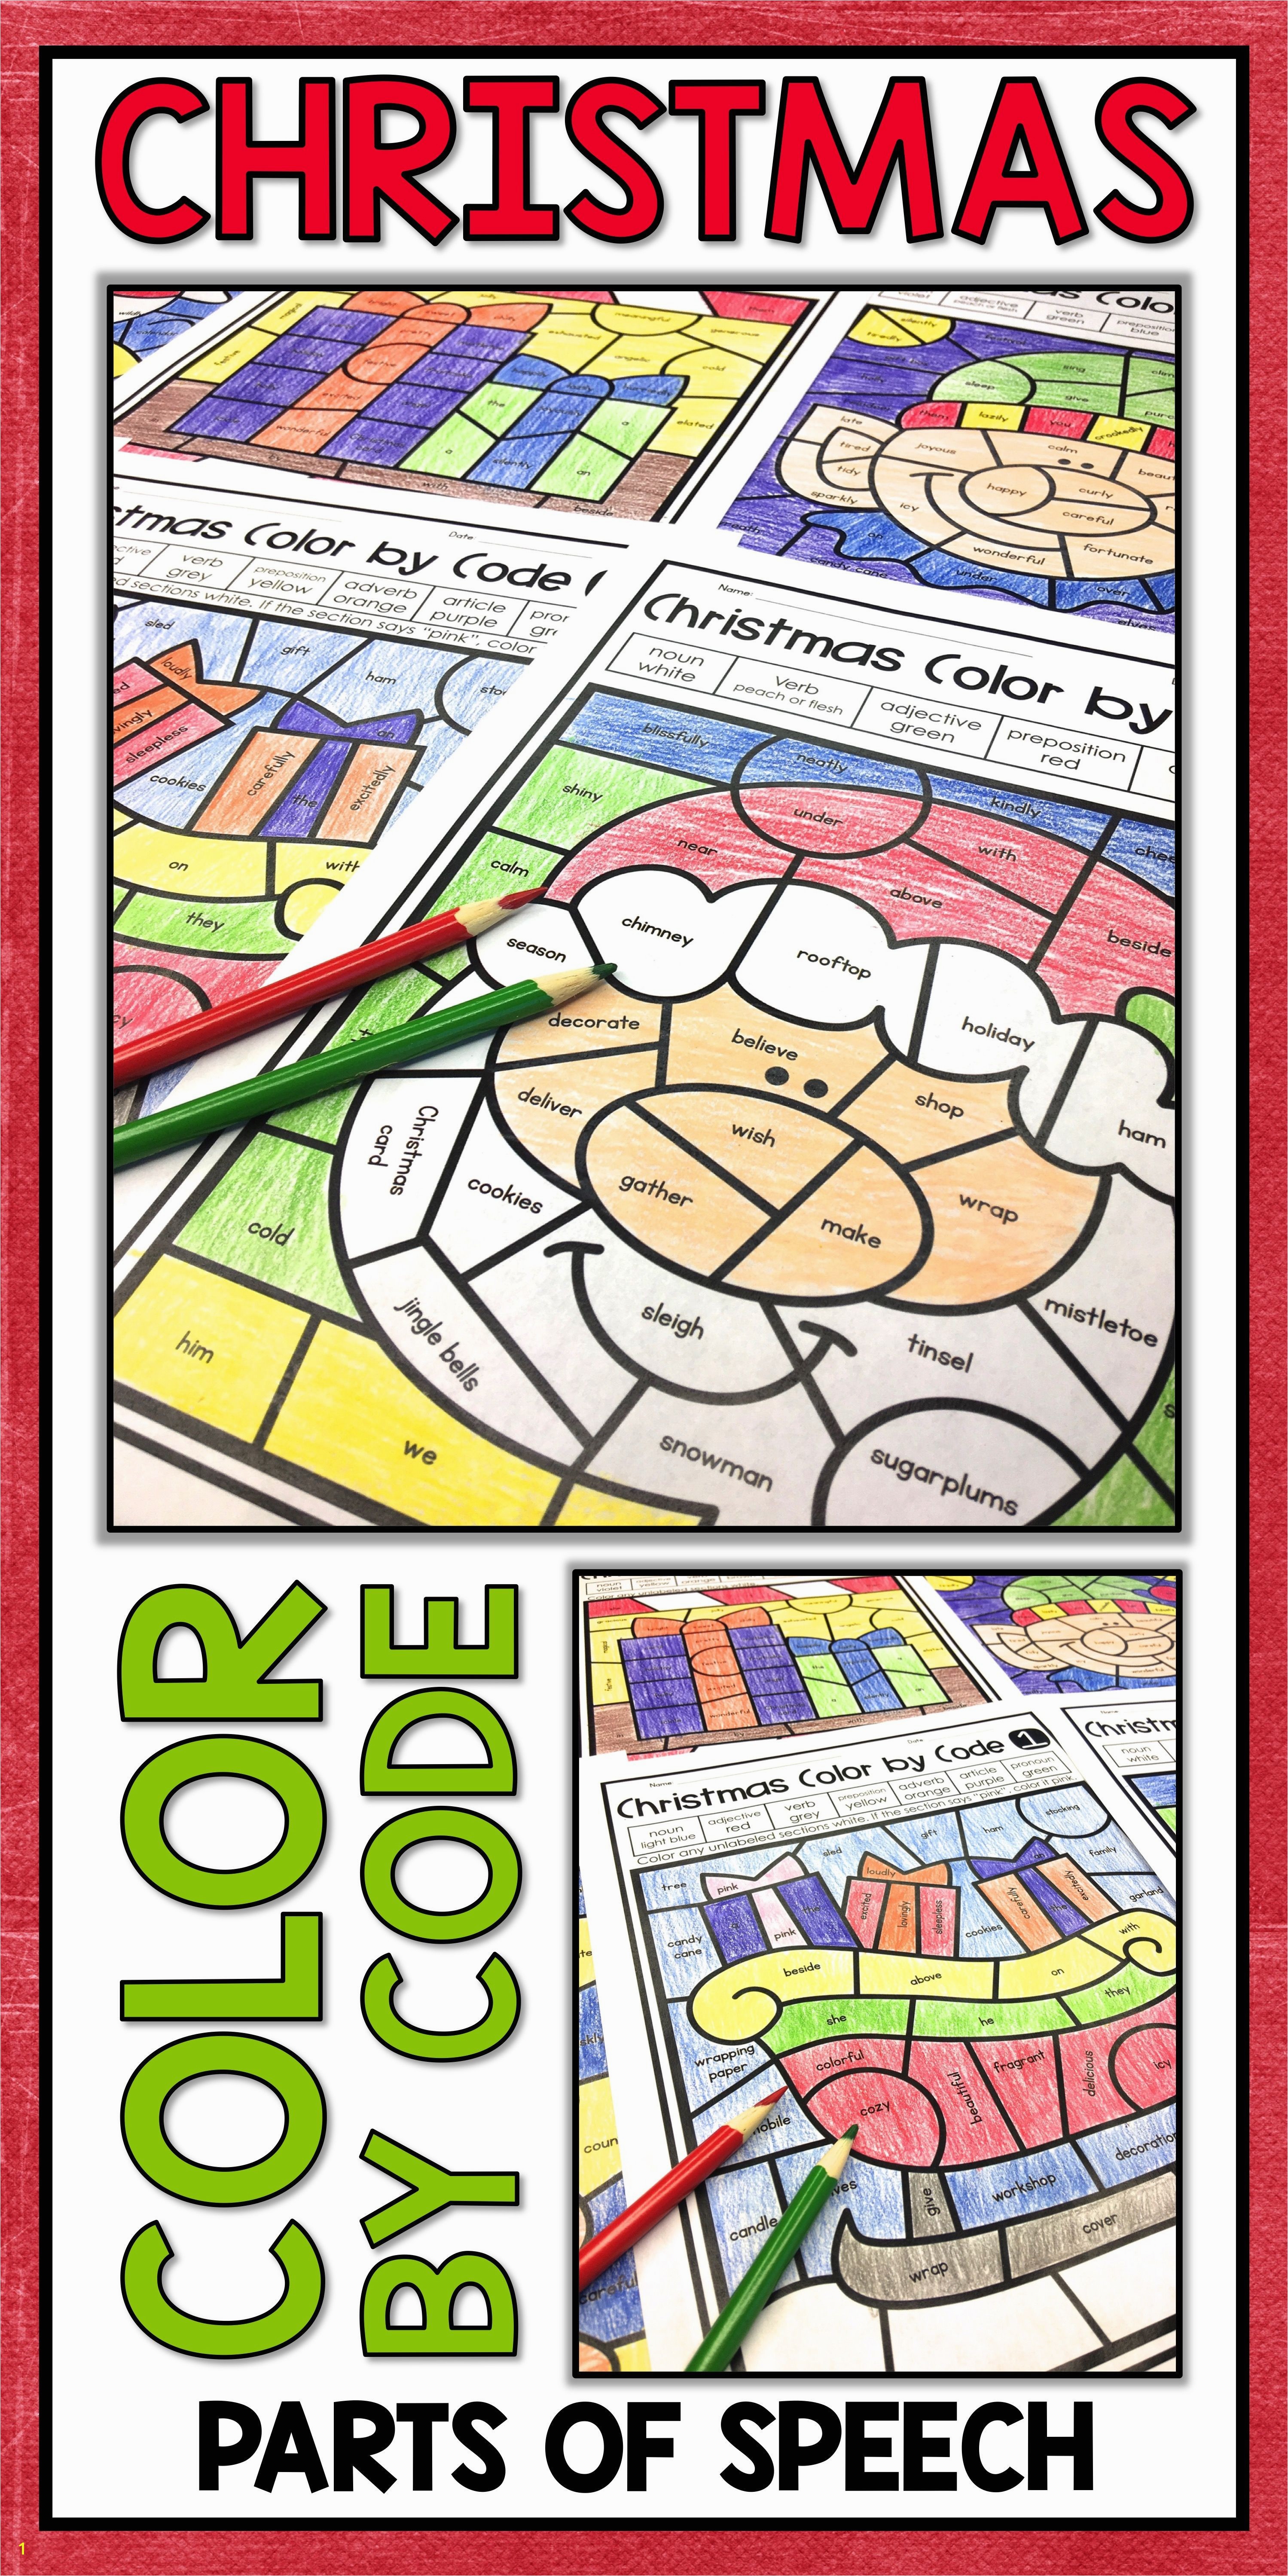 15 Awesome Preposition Coloring Pages Gallery